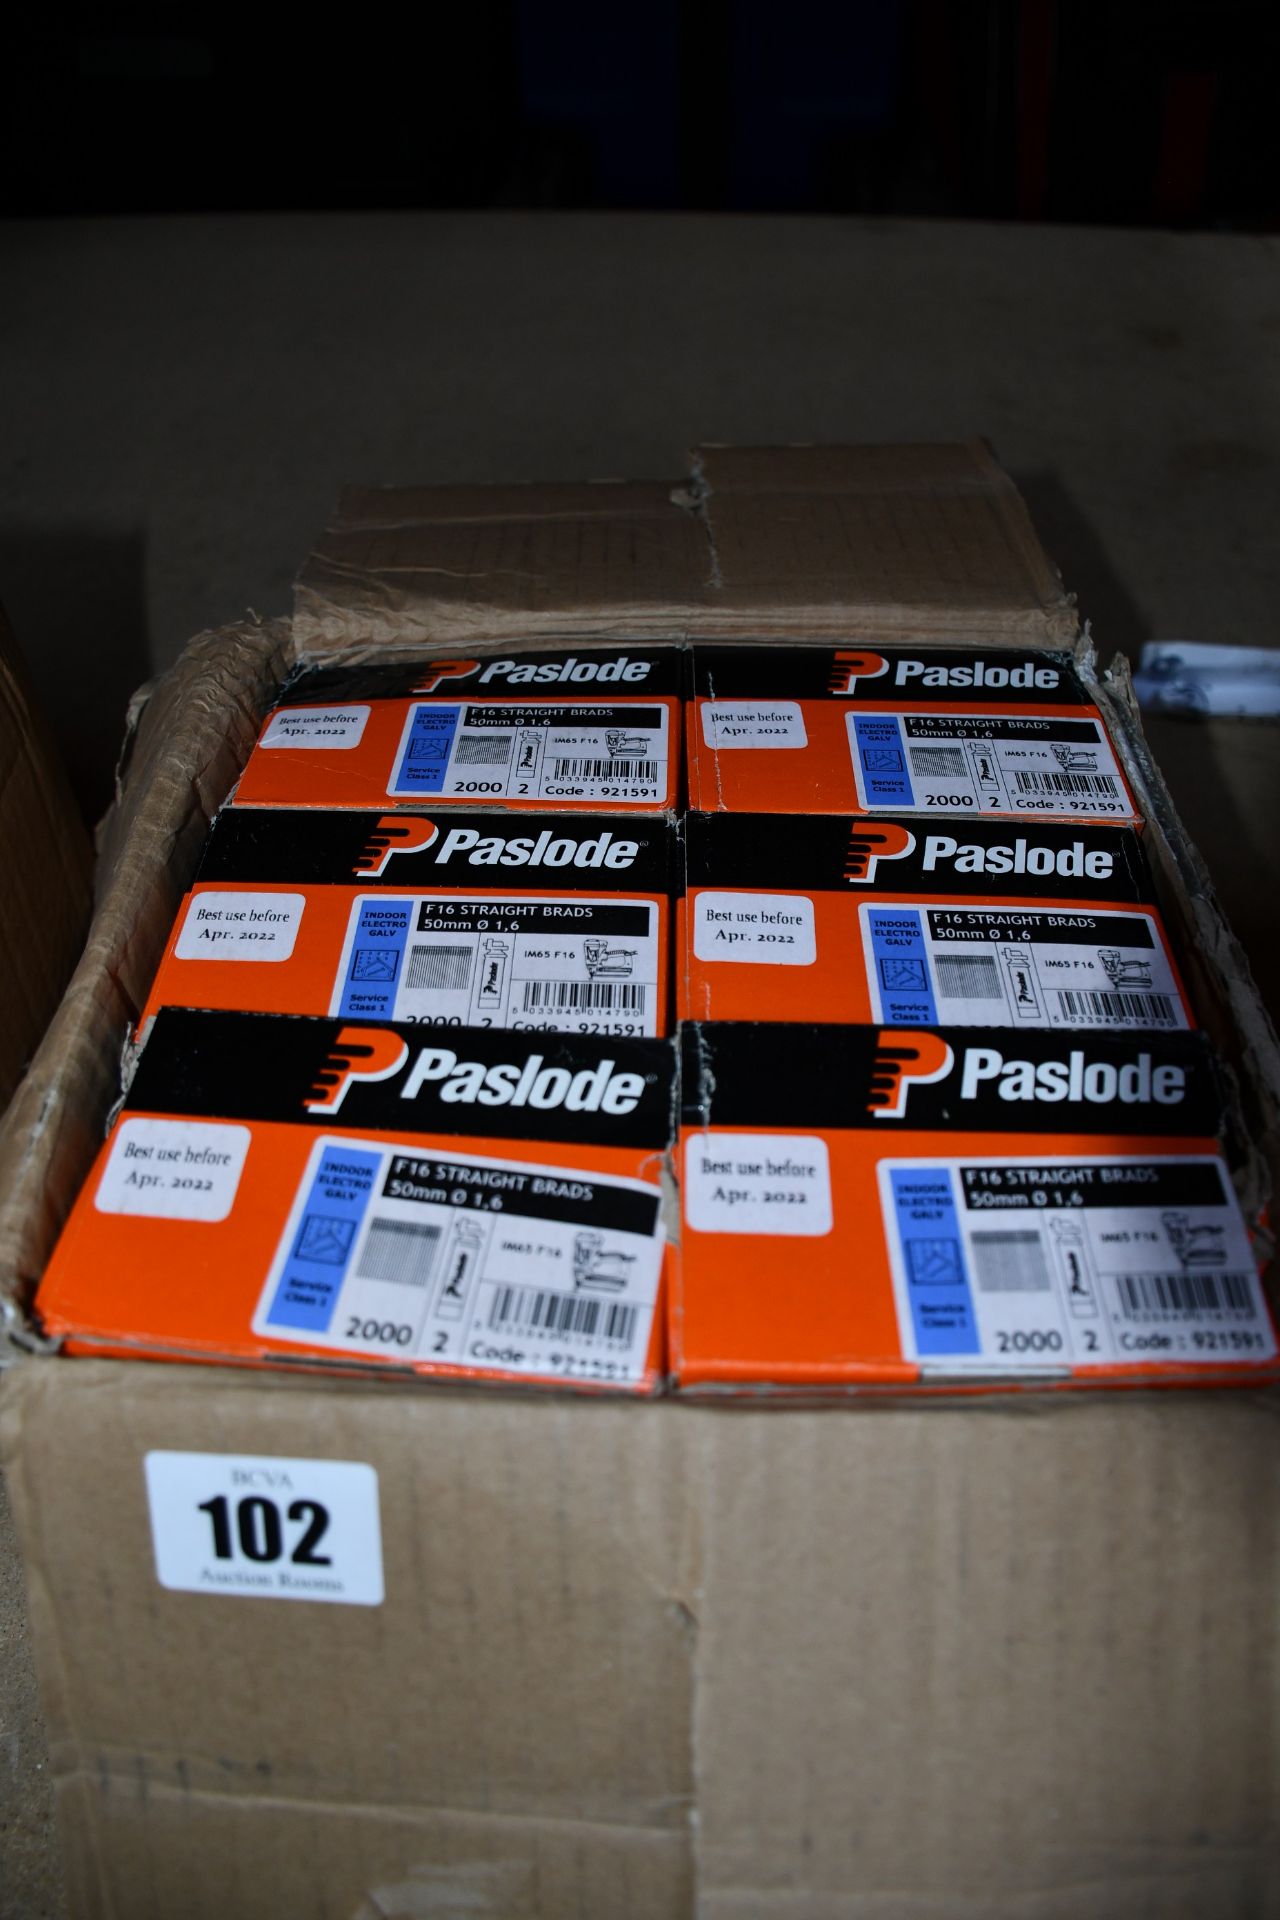 Six boxes of Paslode 921591 1.6 x 50mm F16 Straight Brads x 2000 with 2 Fuel Cells.